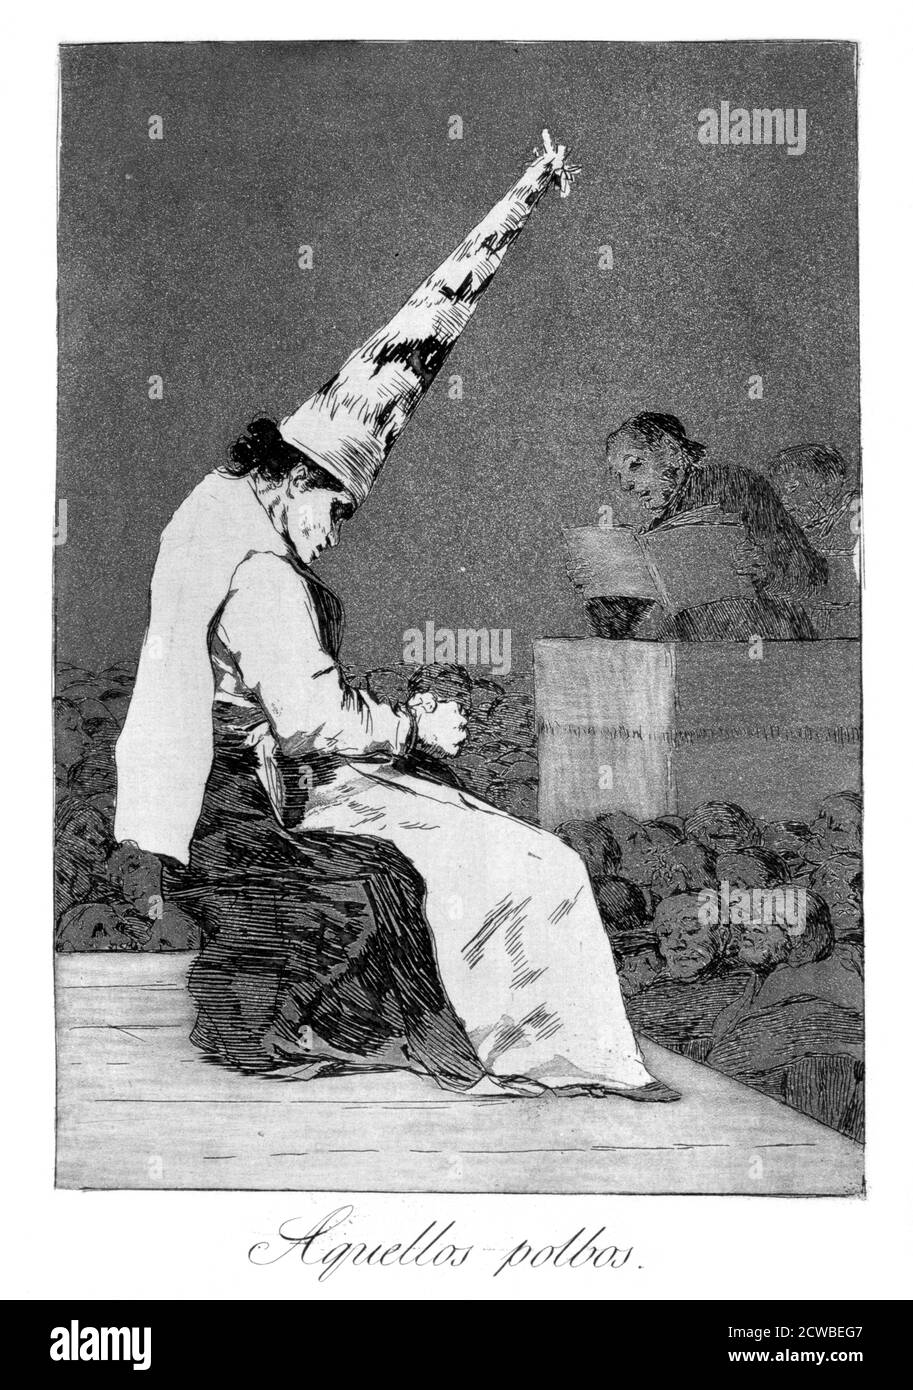 Those specks of dust, Perrico the cripple', 1799 Artist: Francisco Goya. Perrico caught giving love potions to lovers, plate 23 of 'Los Caprichos'. Los Caprichos are a set of 80 prints in aquatint and etching created by the Spanish artist Francisco Goya in 1797 and 1798, and published as an album in 1799. Stock Photo